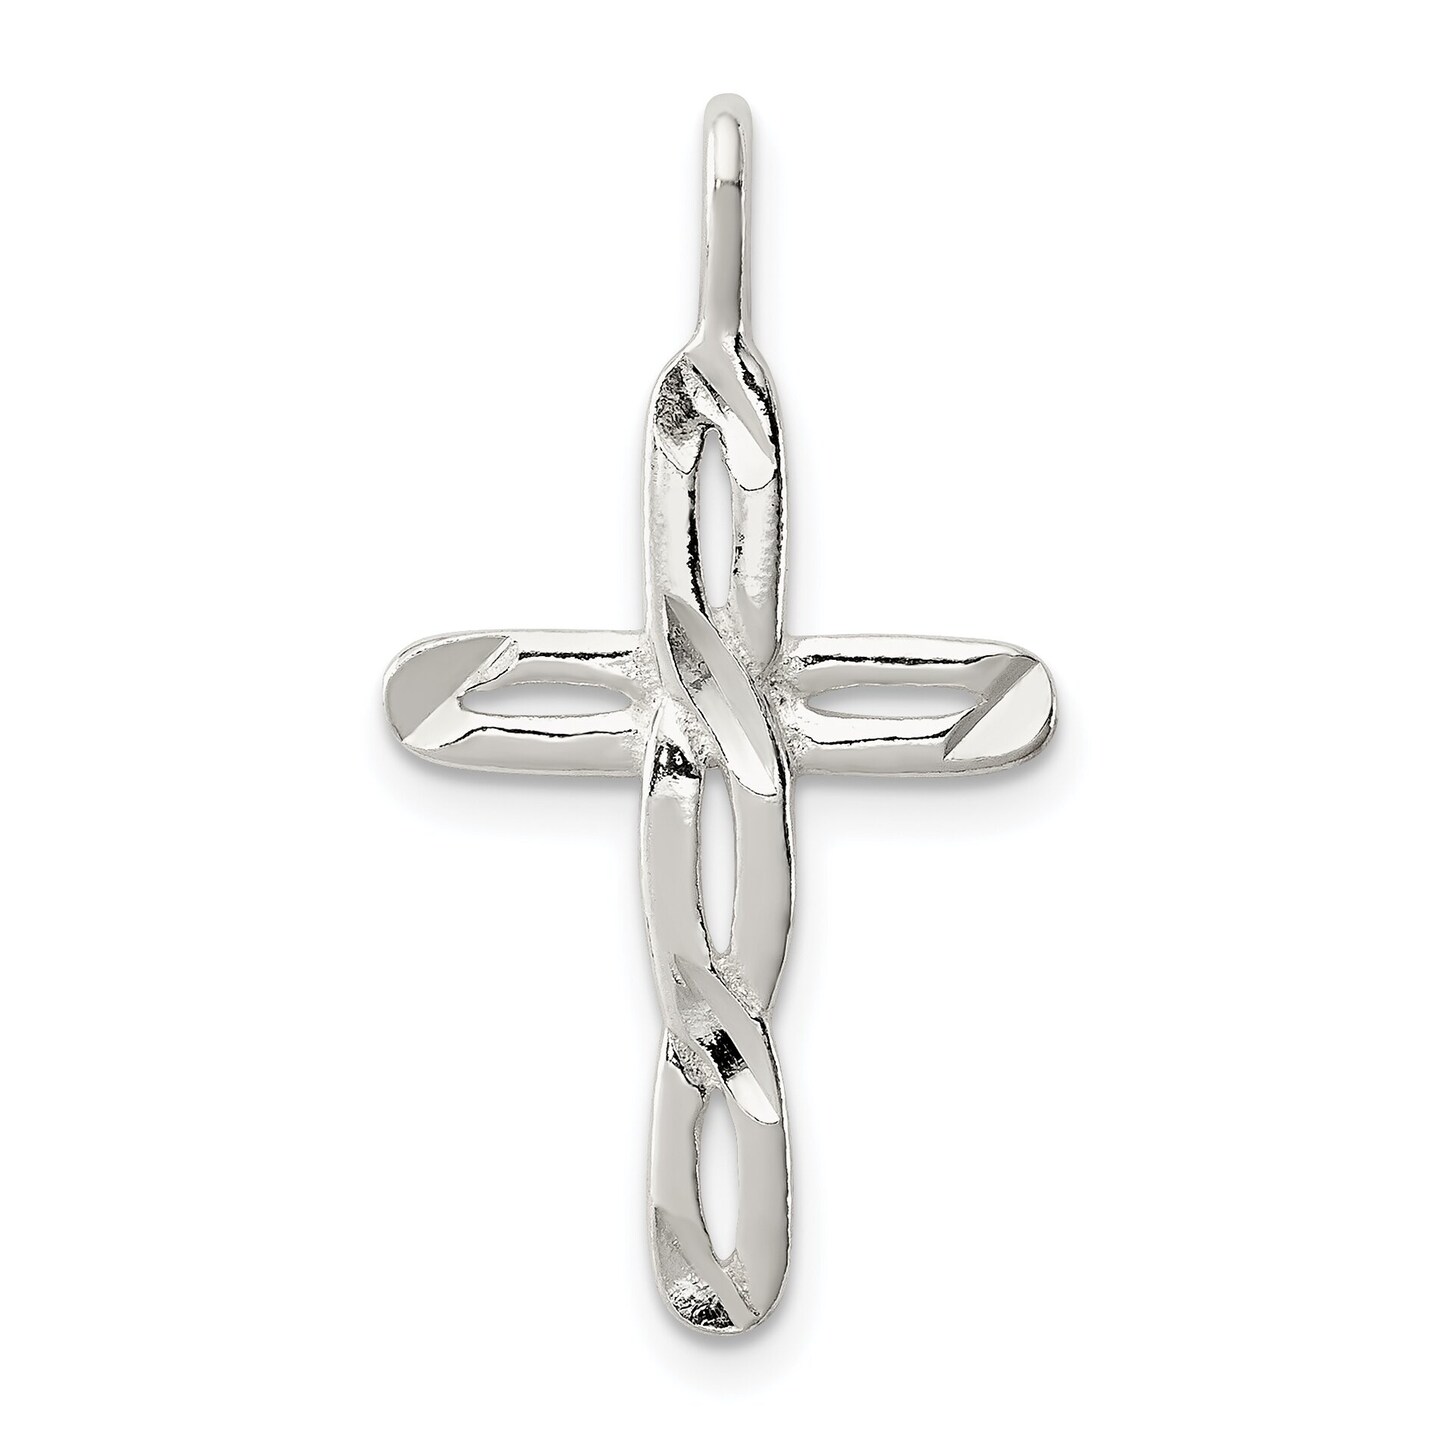 30pcs Antique Silver Cross Charms Cross Pendant,Religious Charm Jewelry Making Jewelry Findings Craft Supplies 36x19mm